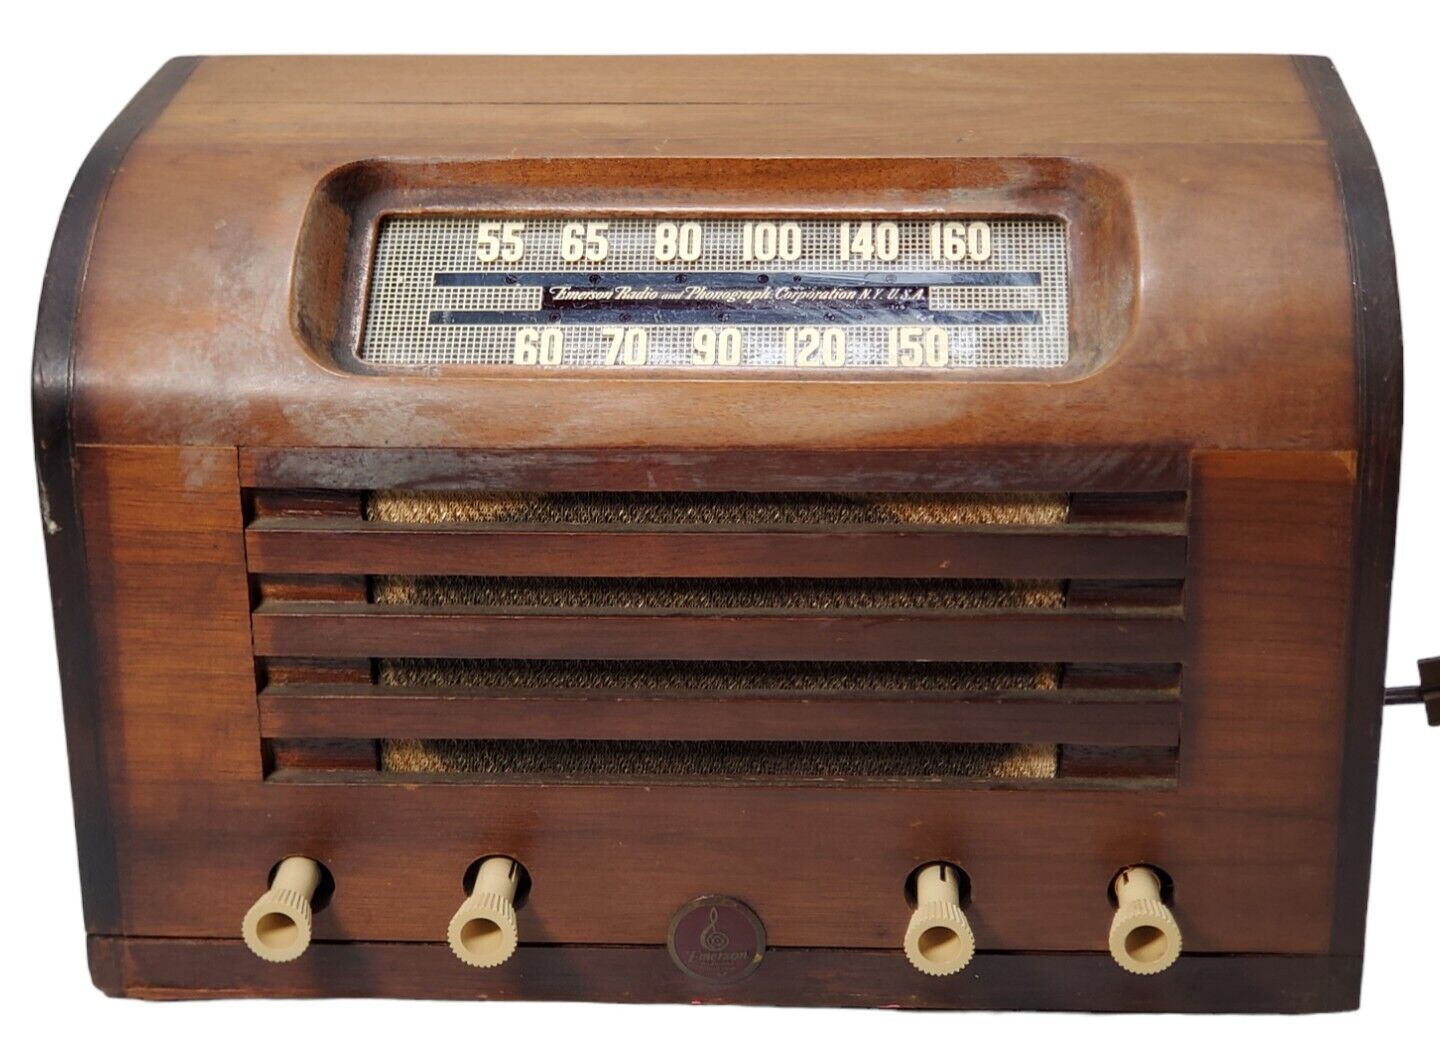 Antique VTG MCM Emerson 530a Wood Table Top Radio Tested